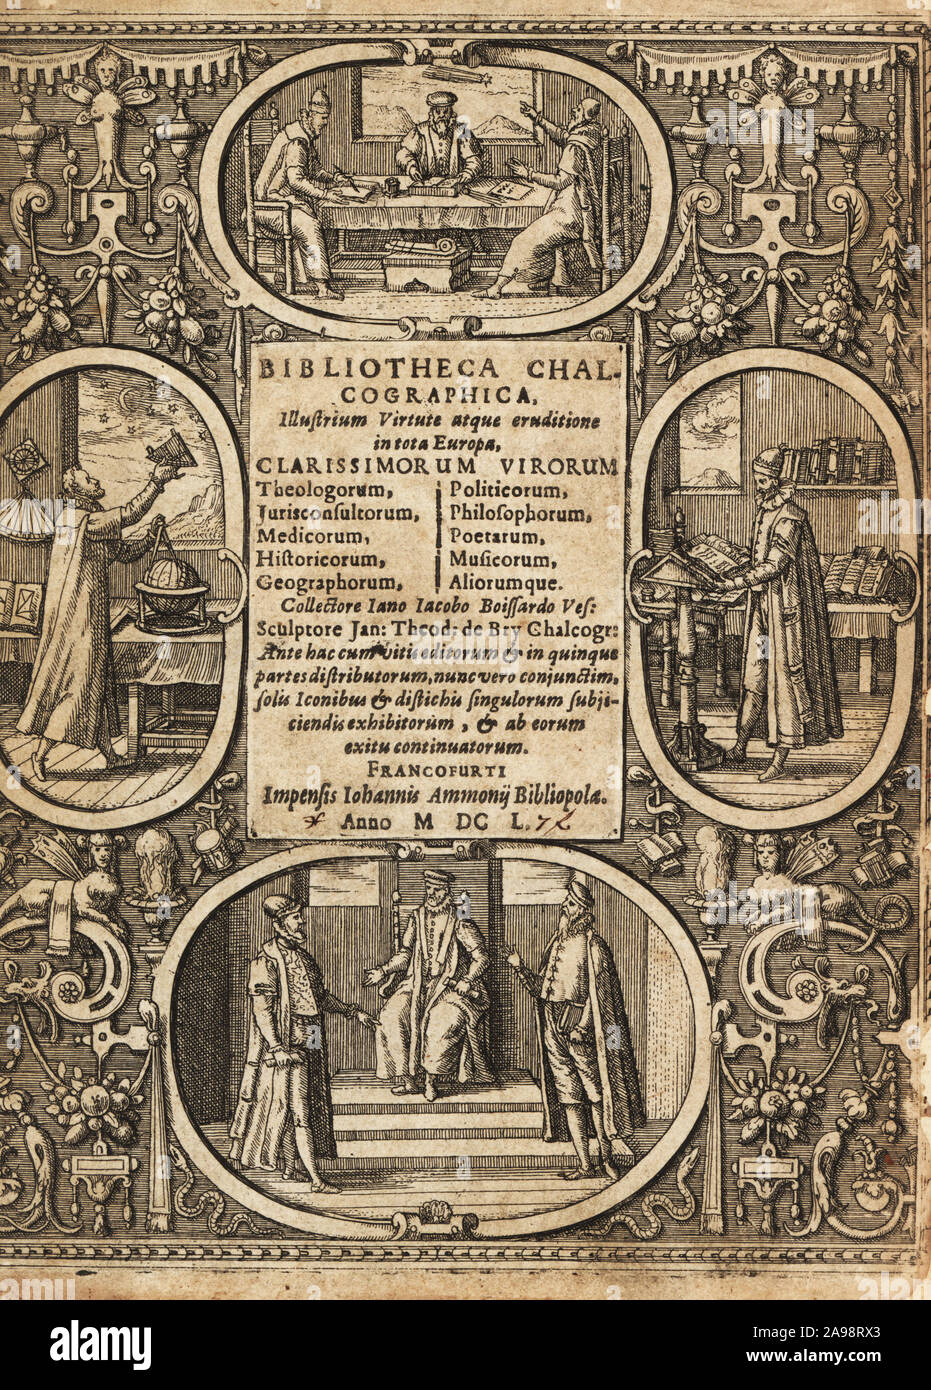 Frontispiece with vignettes of astronomer, geographer, scholars and courtiers within decorative border. Copperplate engraving by Johann Theodore de Bry from Jean-Jacques Boissard’s Bibliotheca Chalcographica, Johann Ammonius, Frankfurt, 1650. Stock Photo